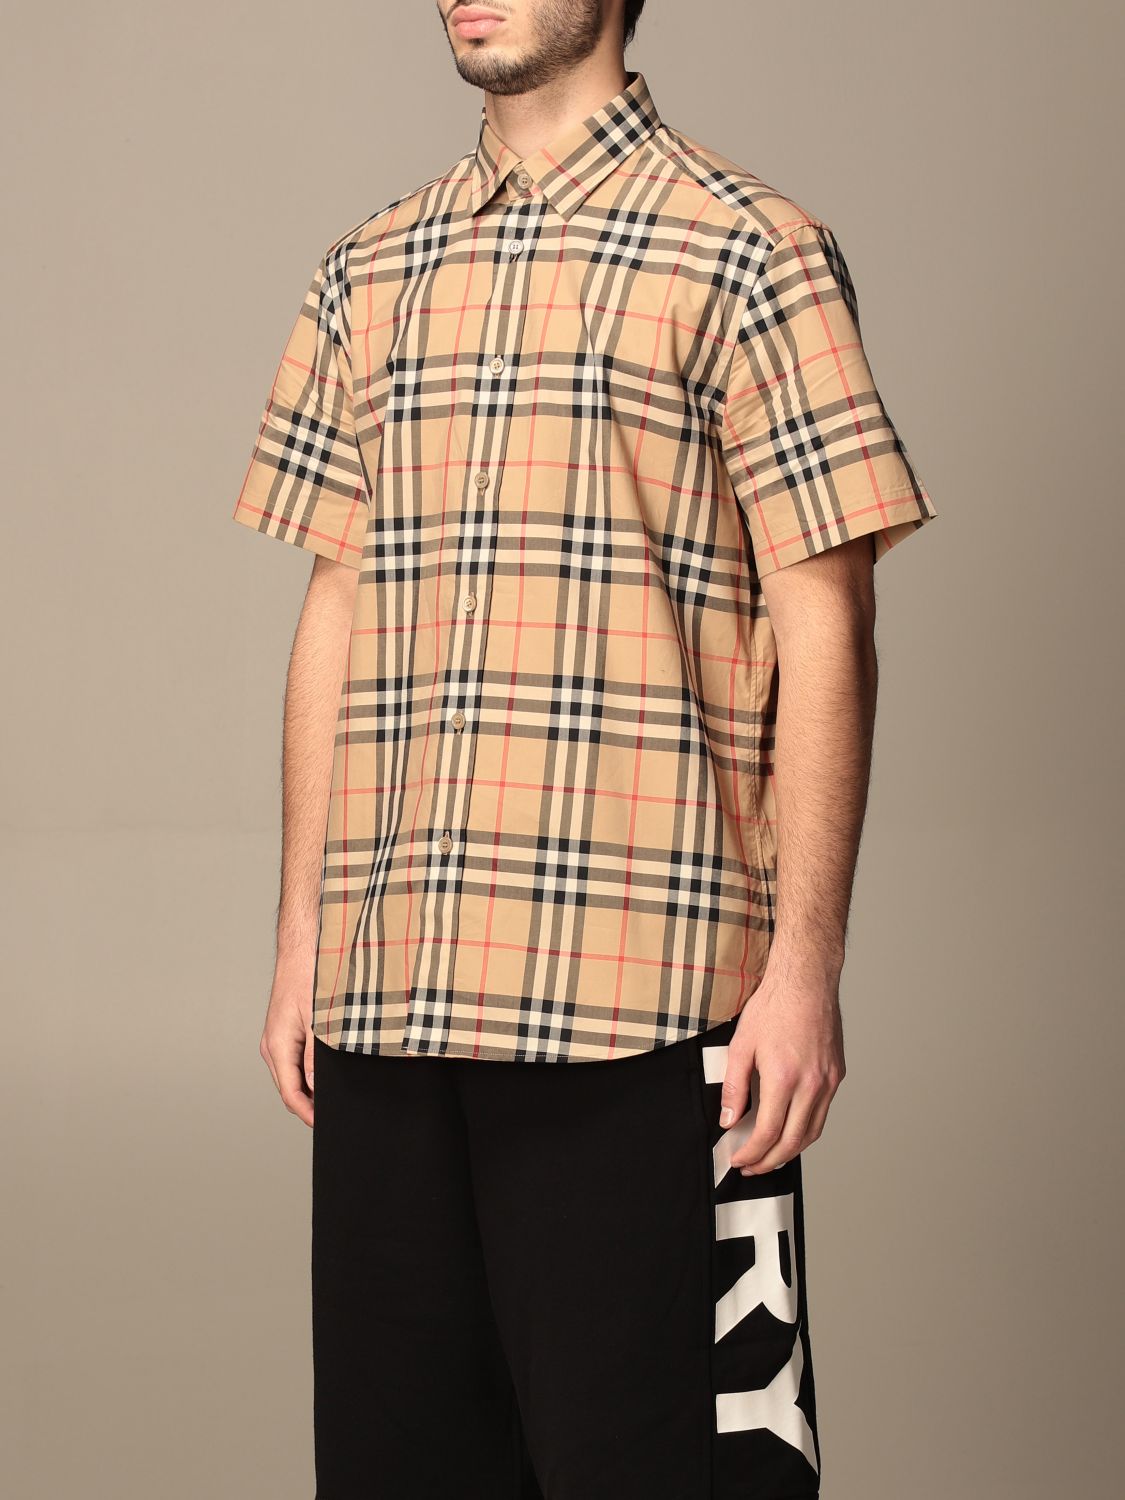 BURBERRY: Caxton shirt in cotton poplin with check pattern | Shirt 